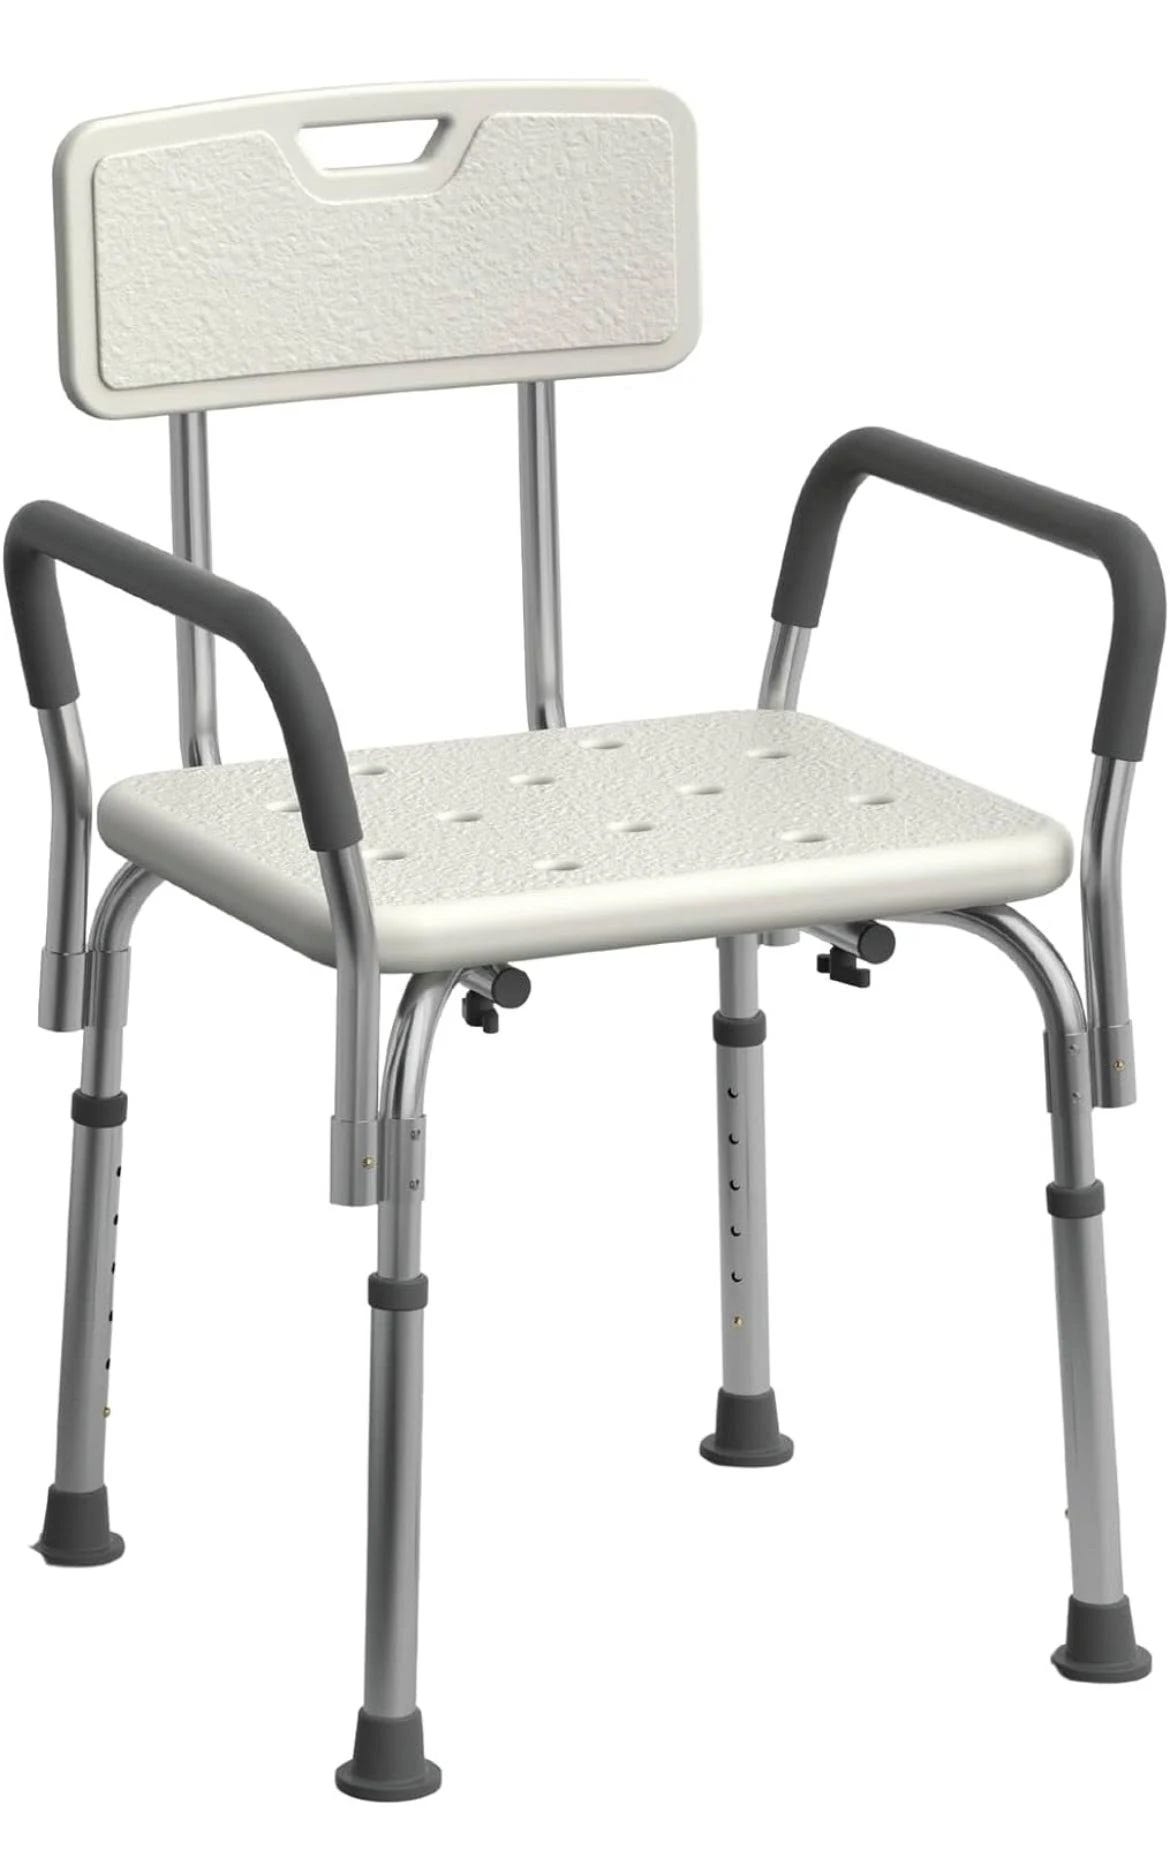 Adjustable Shower Chair with Padded Arms and Anti-Slip Feet | Image